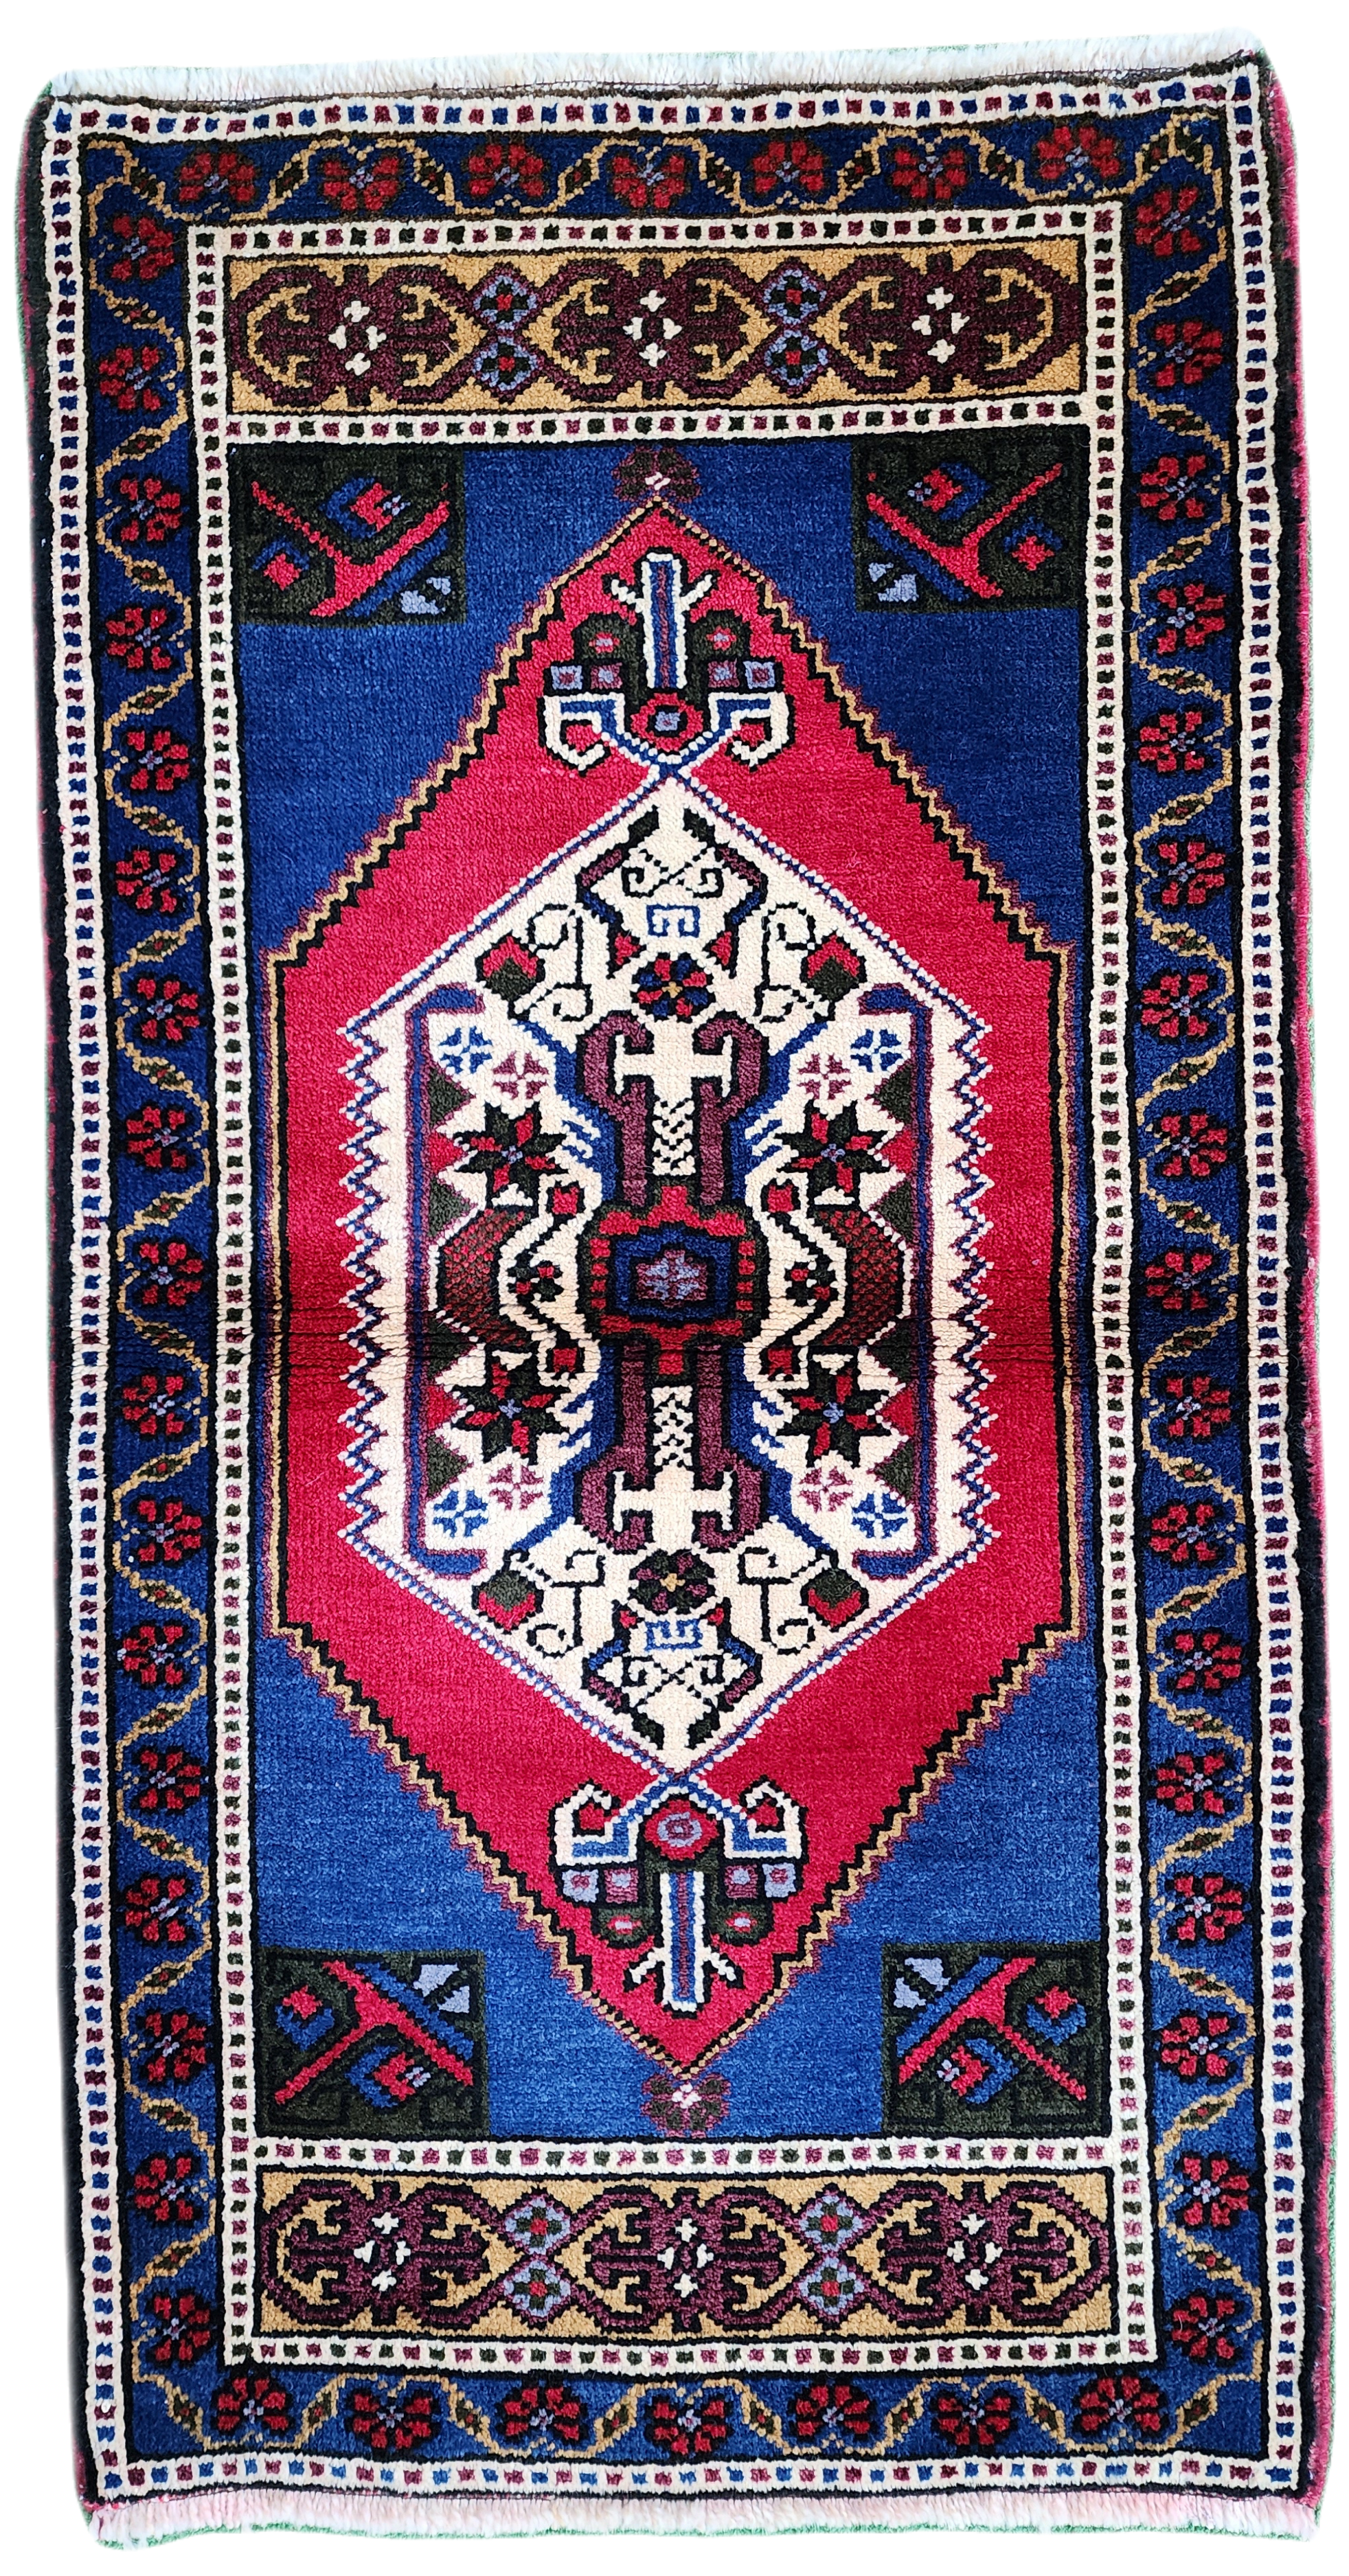 Vintage Turkish Small Rug,  3 ft 6 in  x  2 ft, Red Blue and Beige Faded Distressed Antique Style Mat